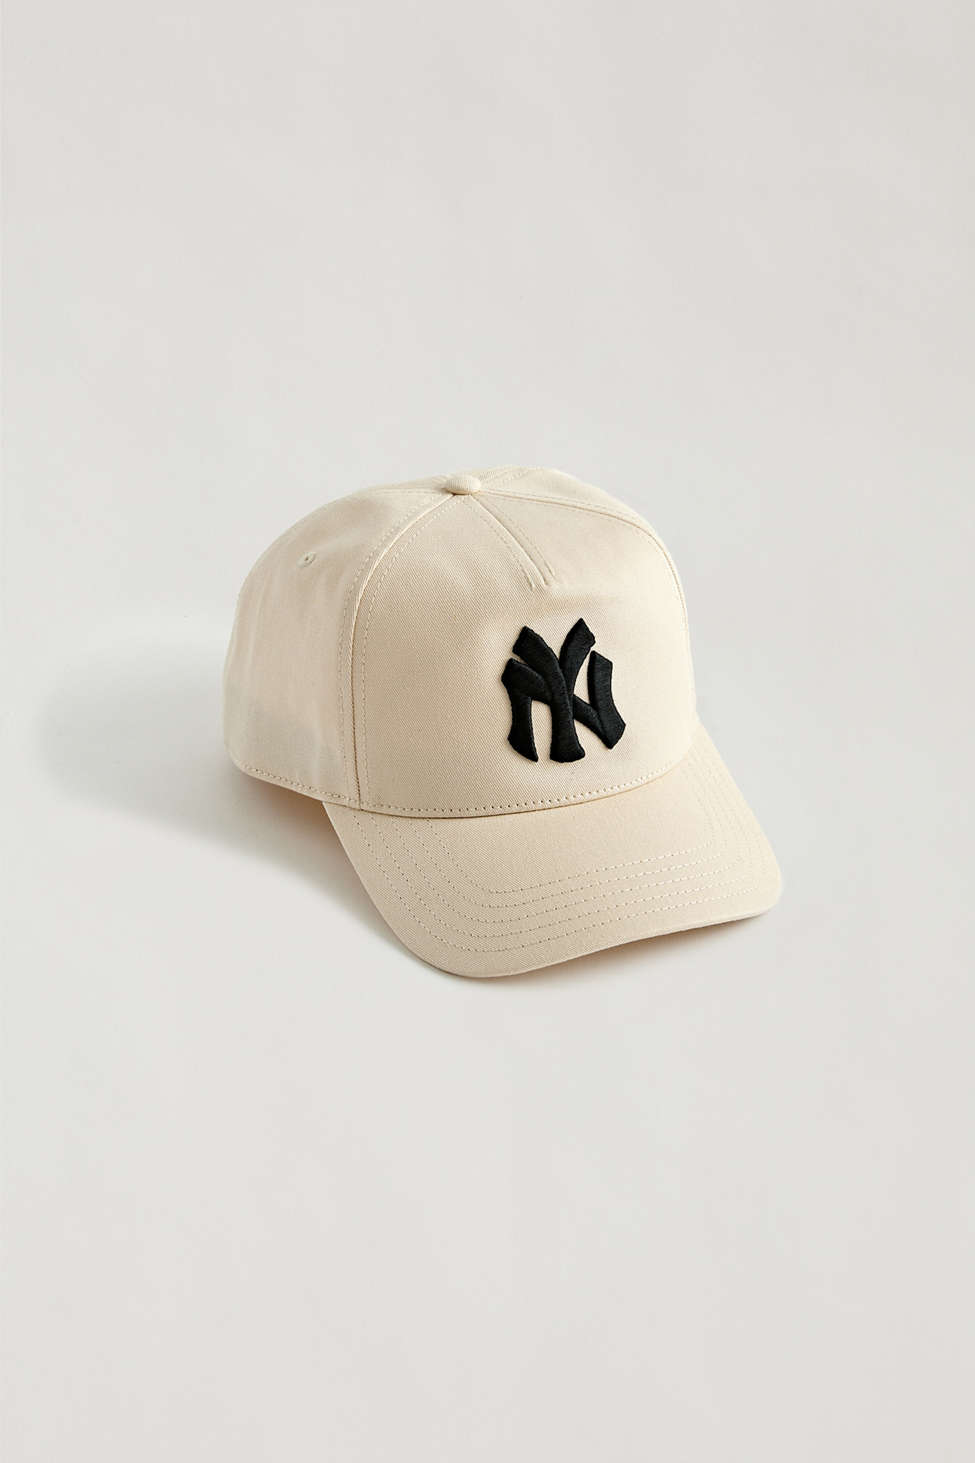 American Needle New York Eagles Hat In Cream, Men's At Urban Outfitters